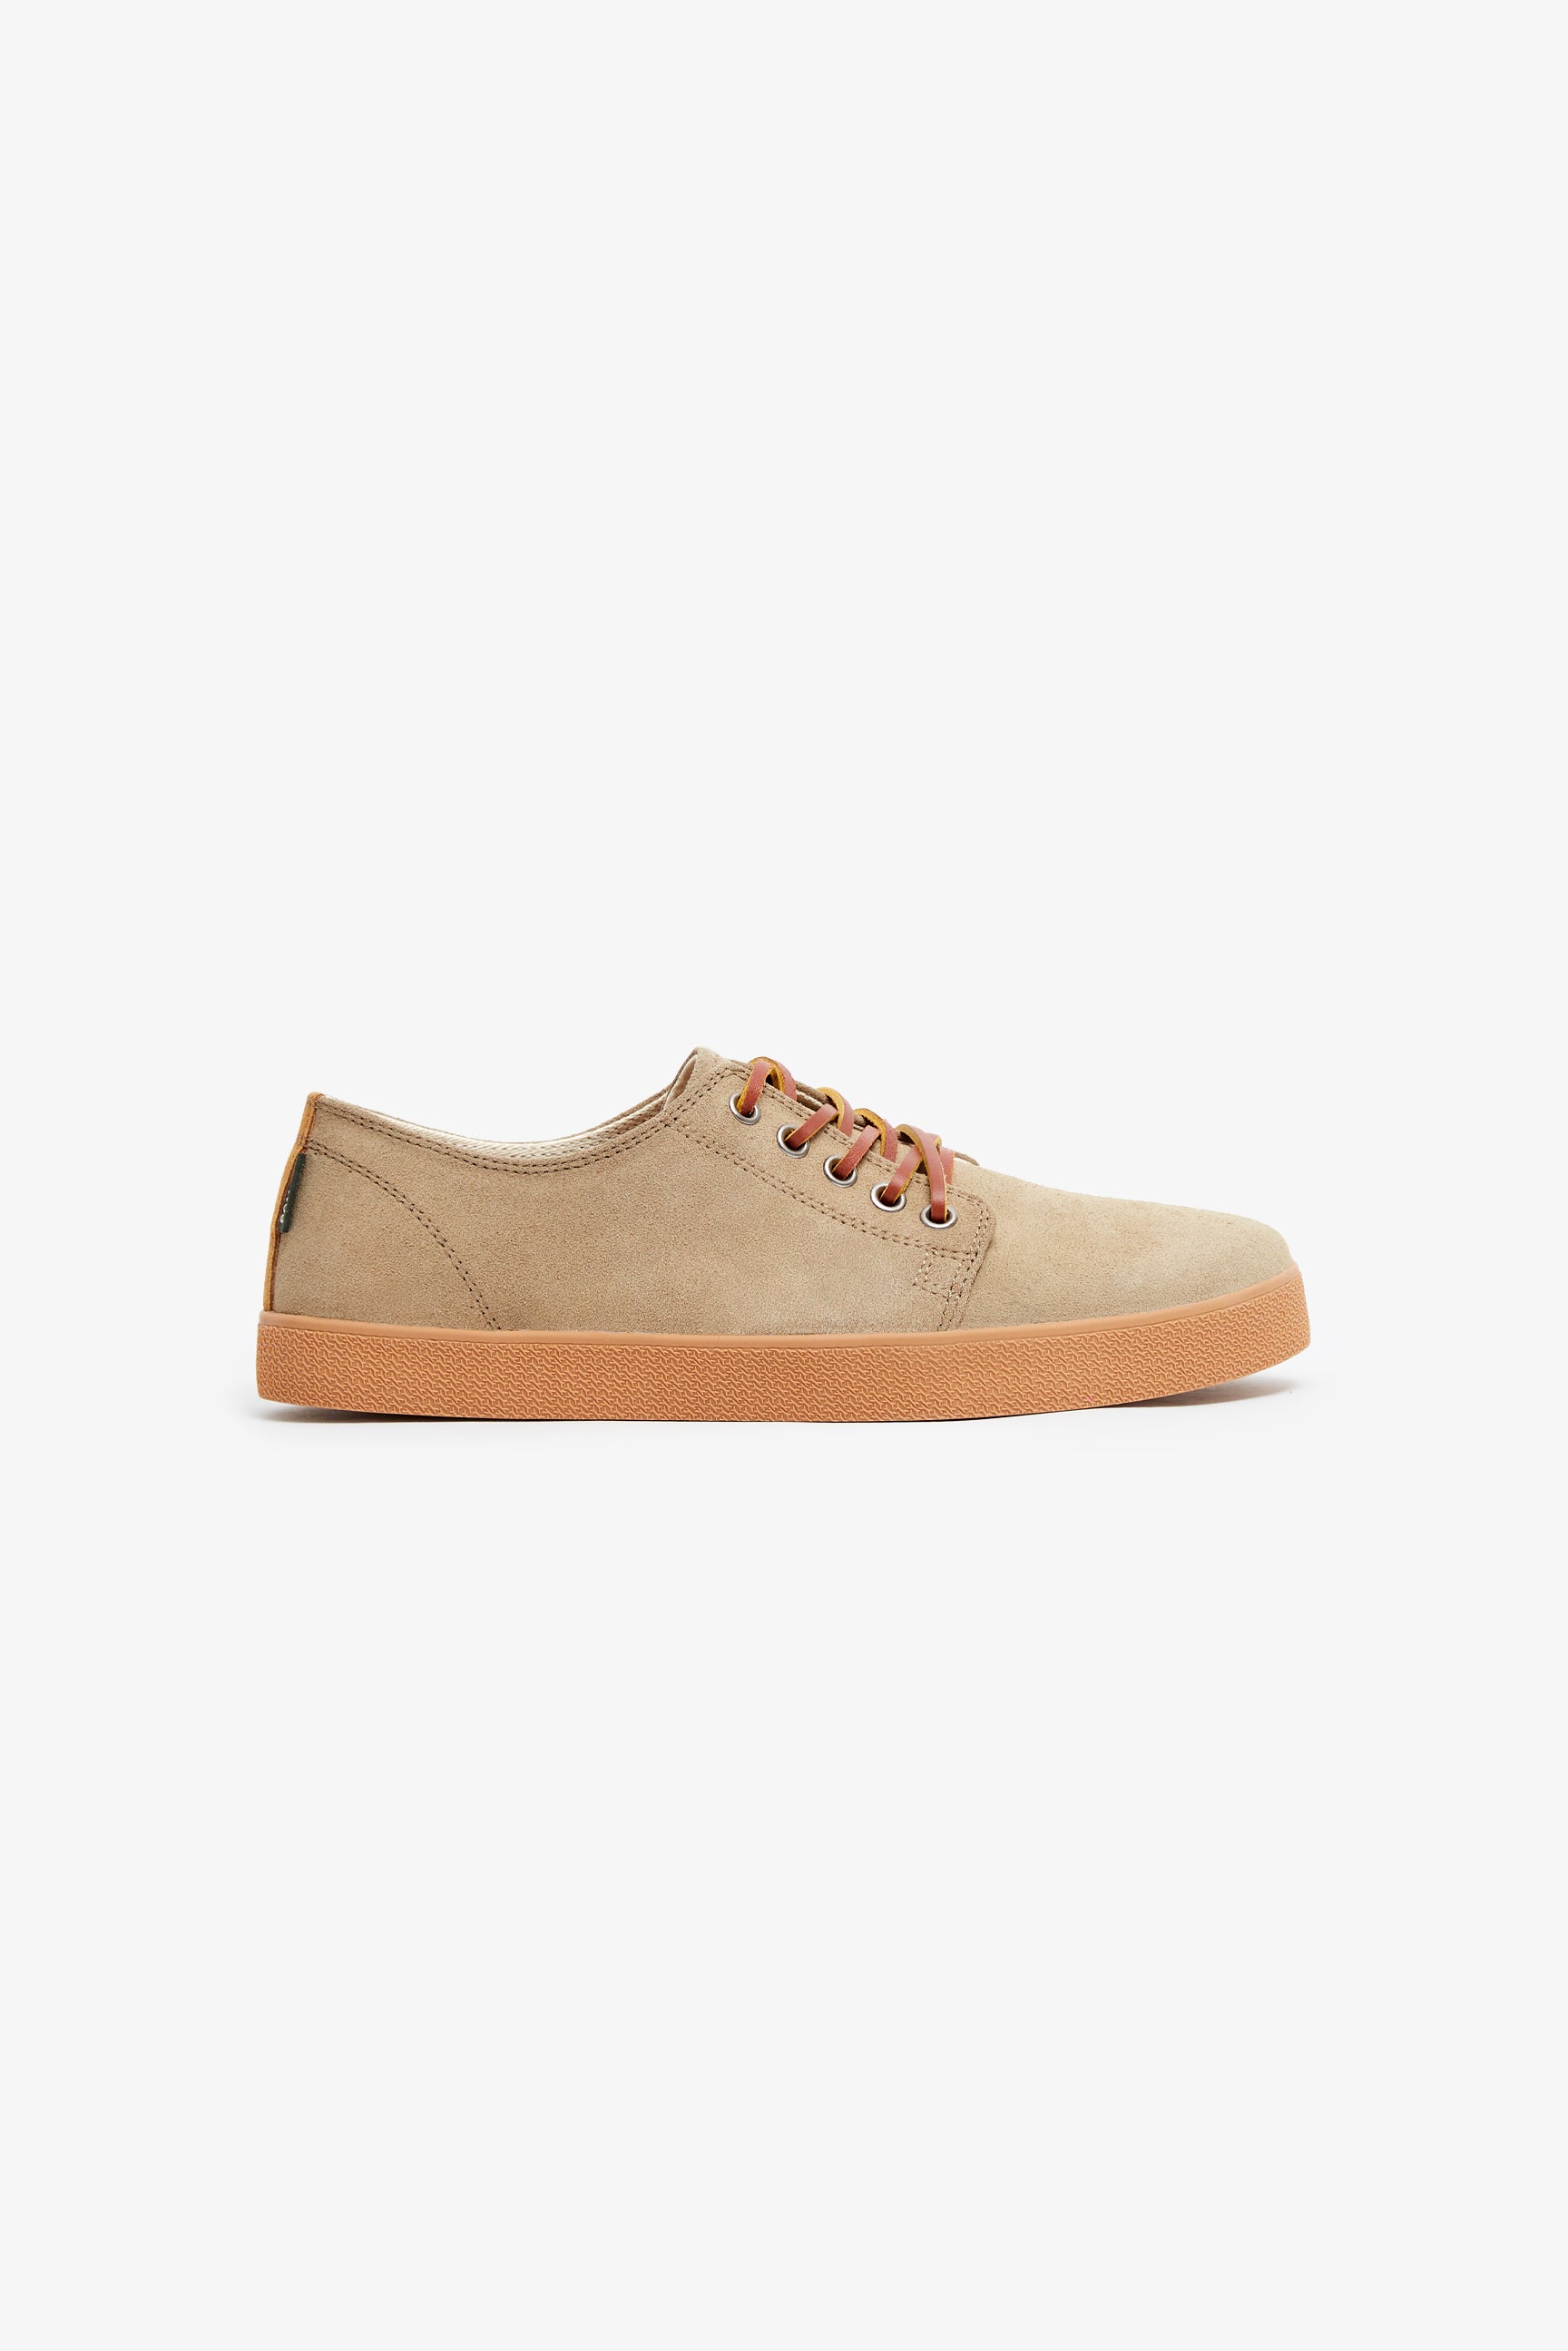 Pompeii Moss Caramel Higby Suede Hydro Shoes